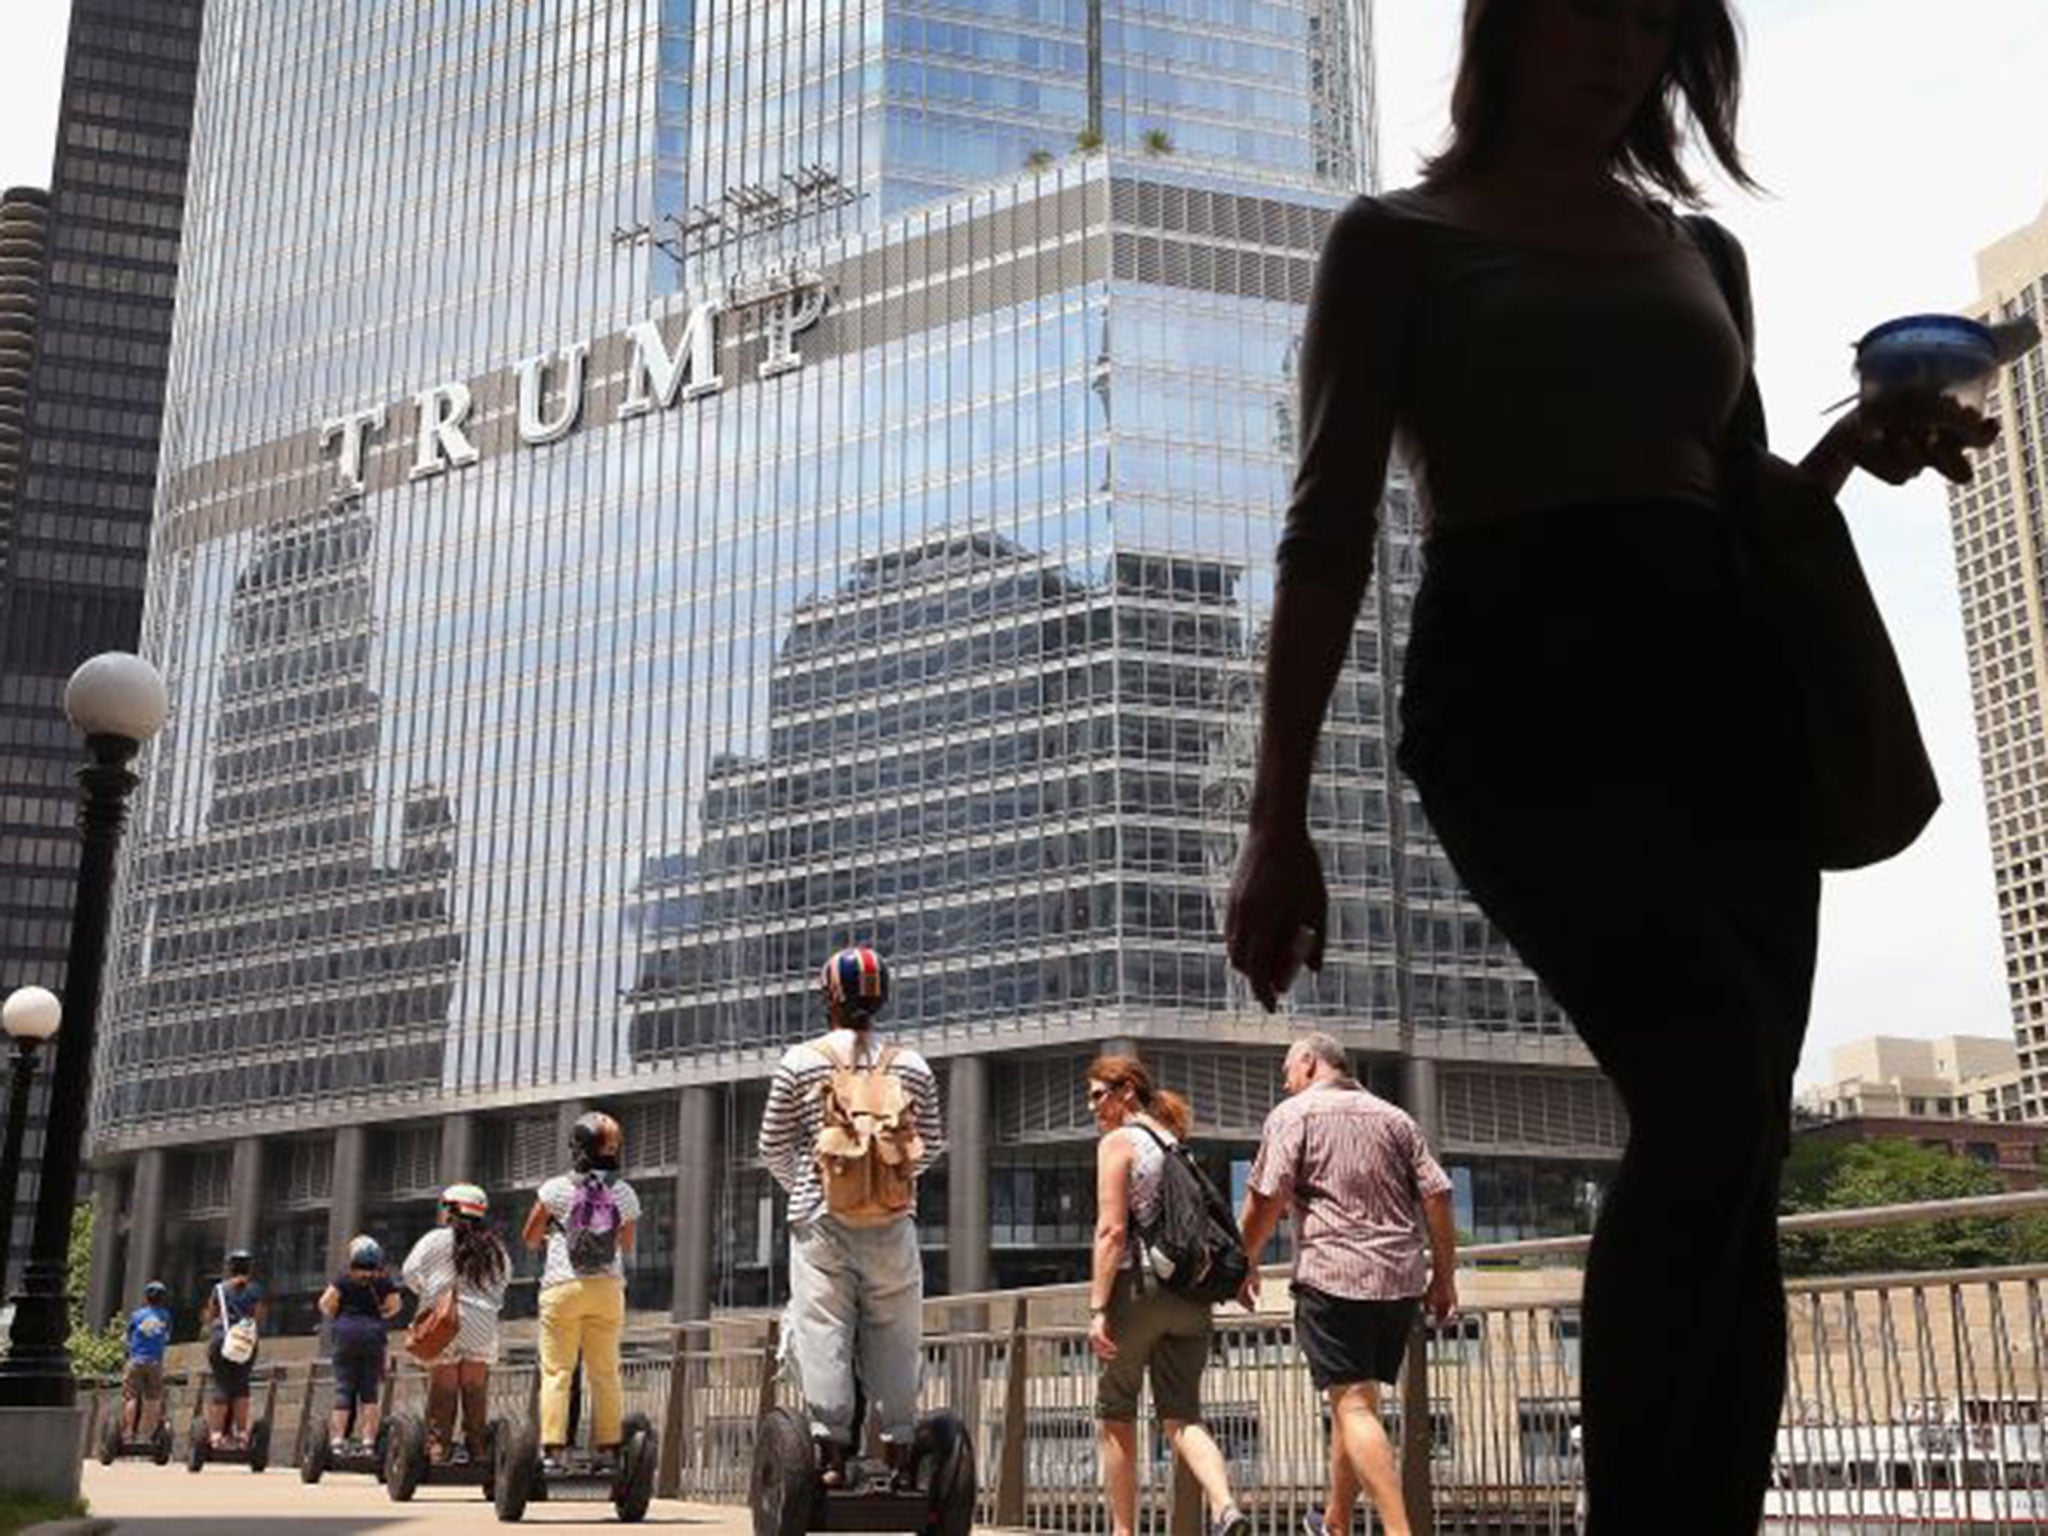 The Trump International Hotel and Tower in Chicago sports the businessman’s new 20ft-high sign